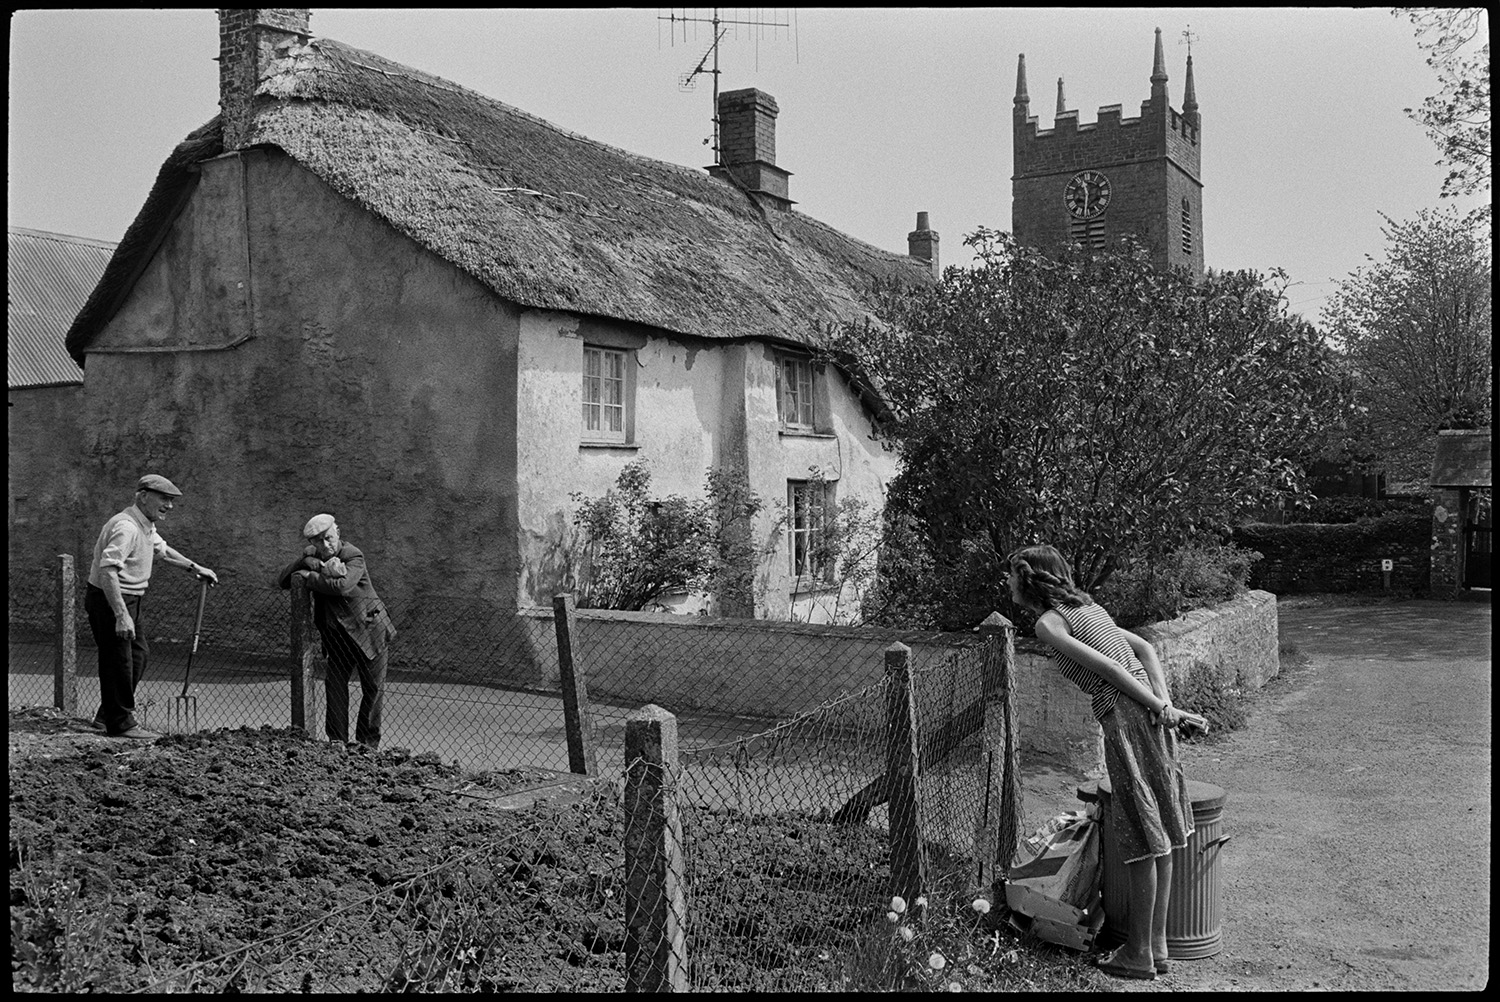 Street scenes, house with porch, thatched farmhouse and door, people chatting, church tower. 
[A woman and man leaning over a garden fence to talk to a man gardening, in Northlew. The woman is stood by rubbish bins. A thatched cottage and the church tower can be seen in the background.]